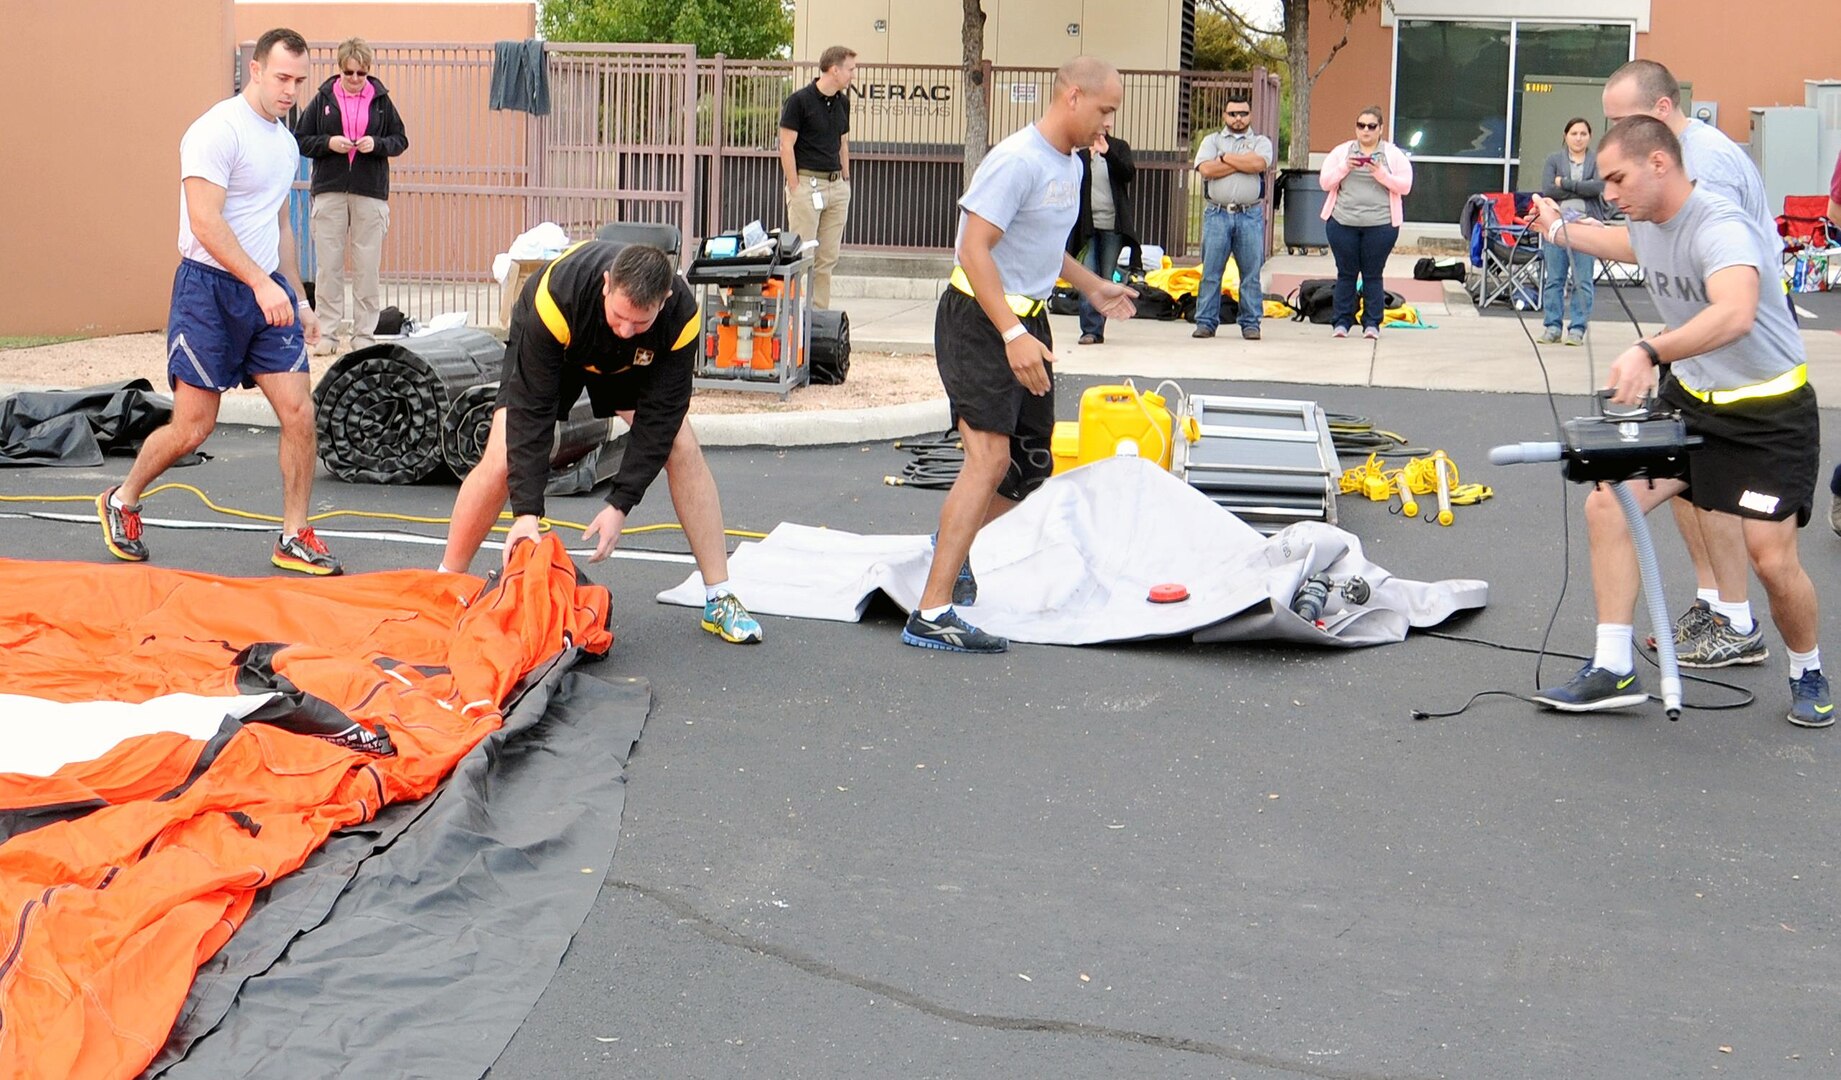 The San Antonio Military Medical Center decontamination team springs into action to assemble a portable decontamination tent during the Decon Rodeo Oct. 29 hosted by the Emergency Medical Service/Hospital Disaster Group Decon-Radiation Safety Officer Committee and the Southwest Texas Regional Advisory Council for Trauma.